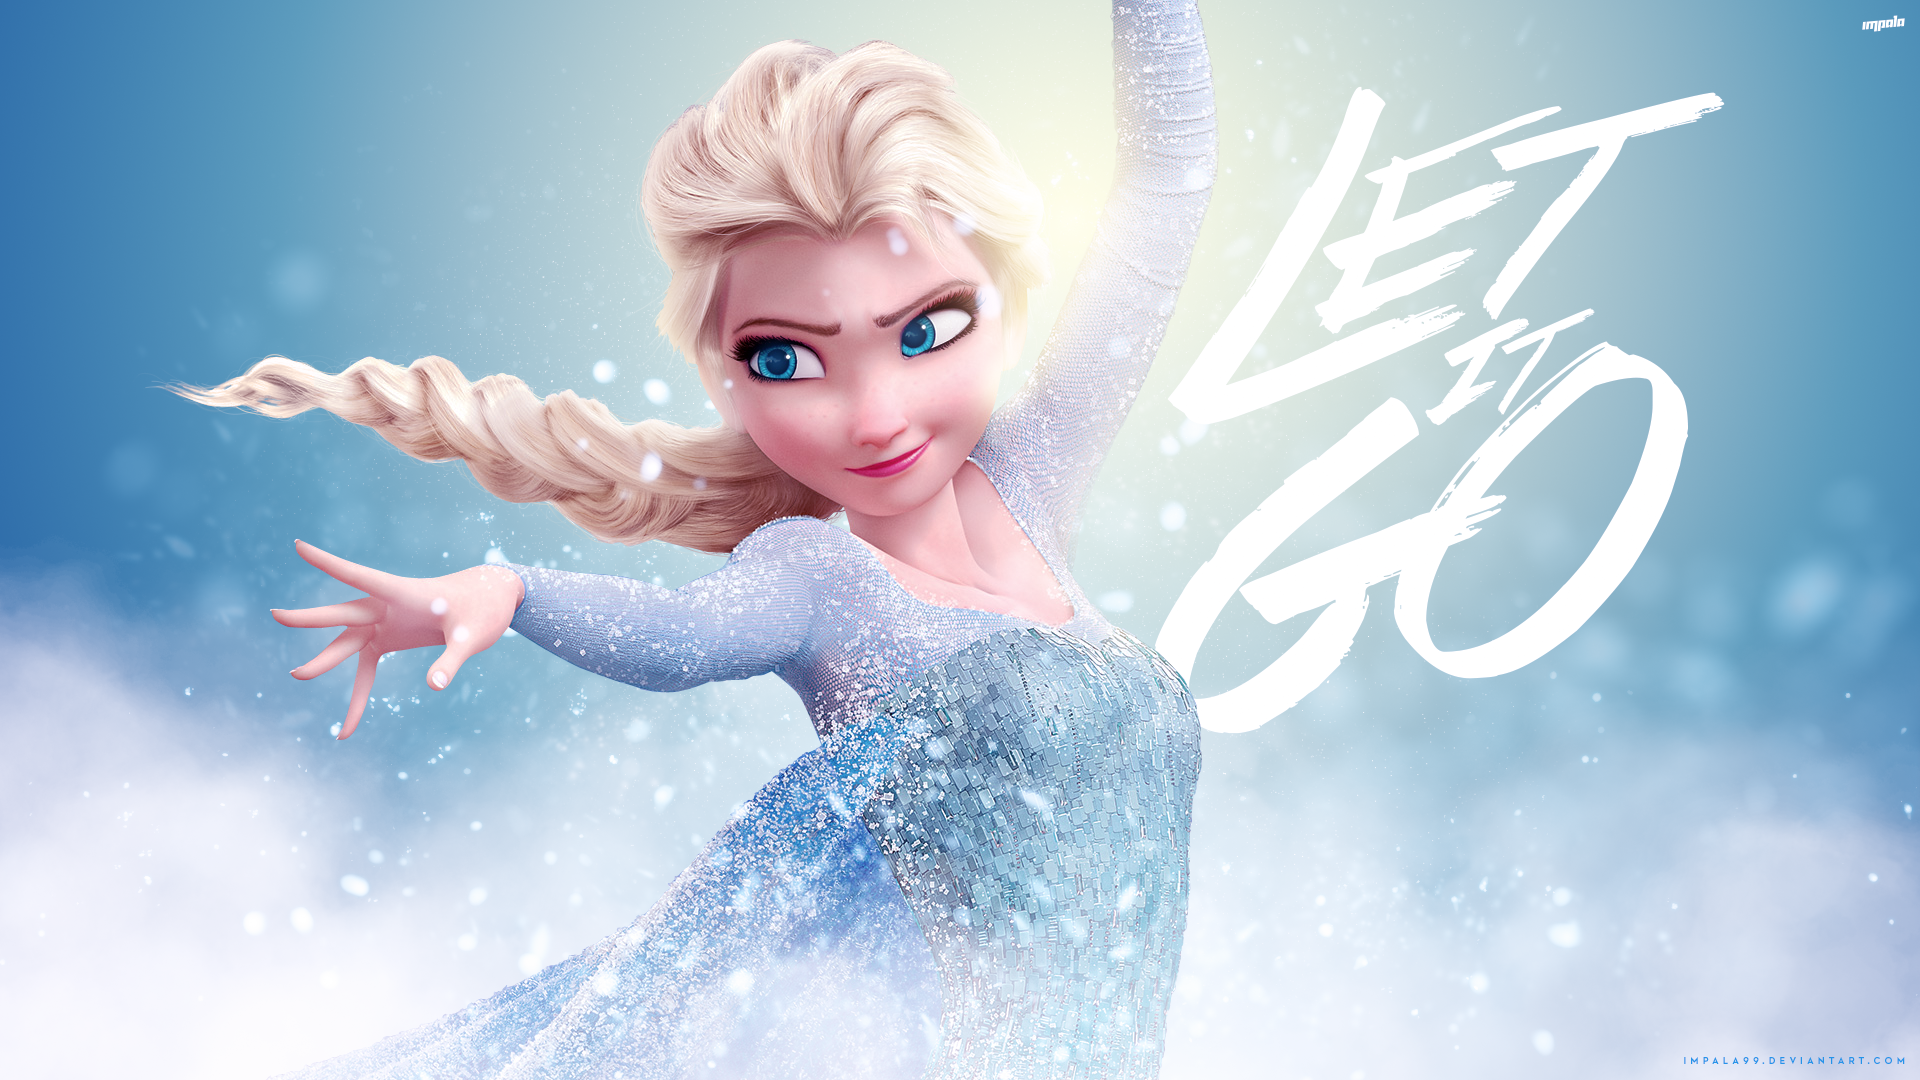 The three ways that Frozen helped me reflect on 2014…